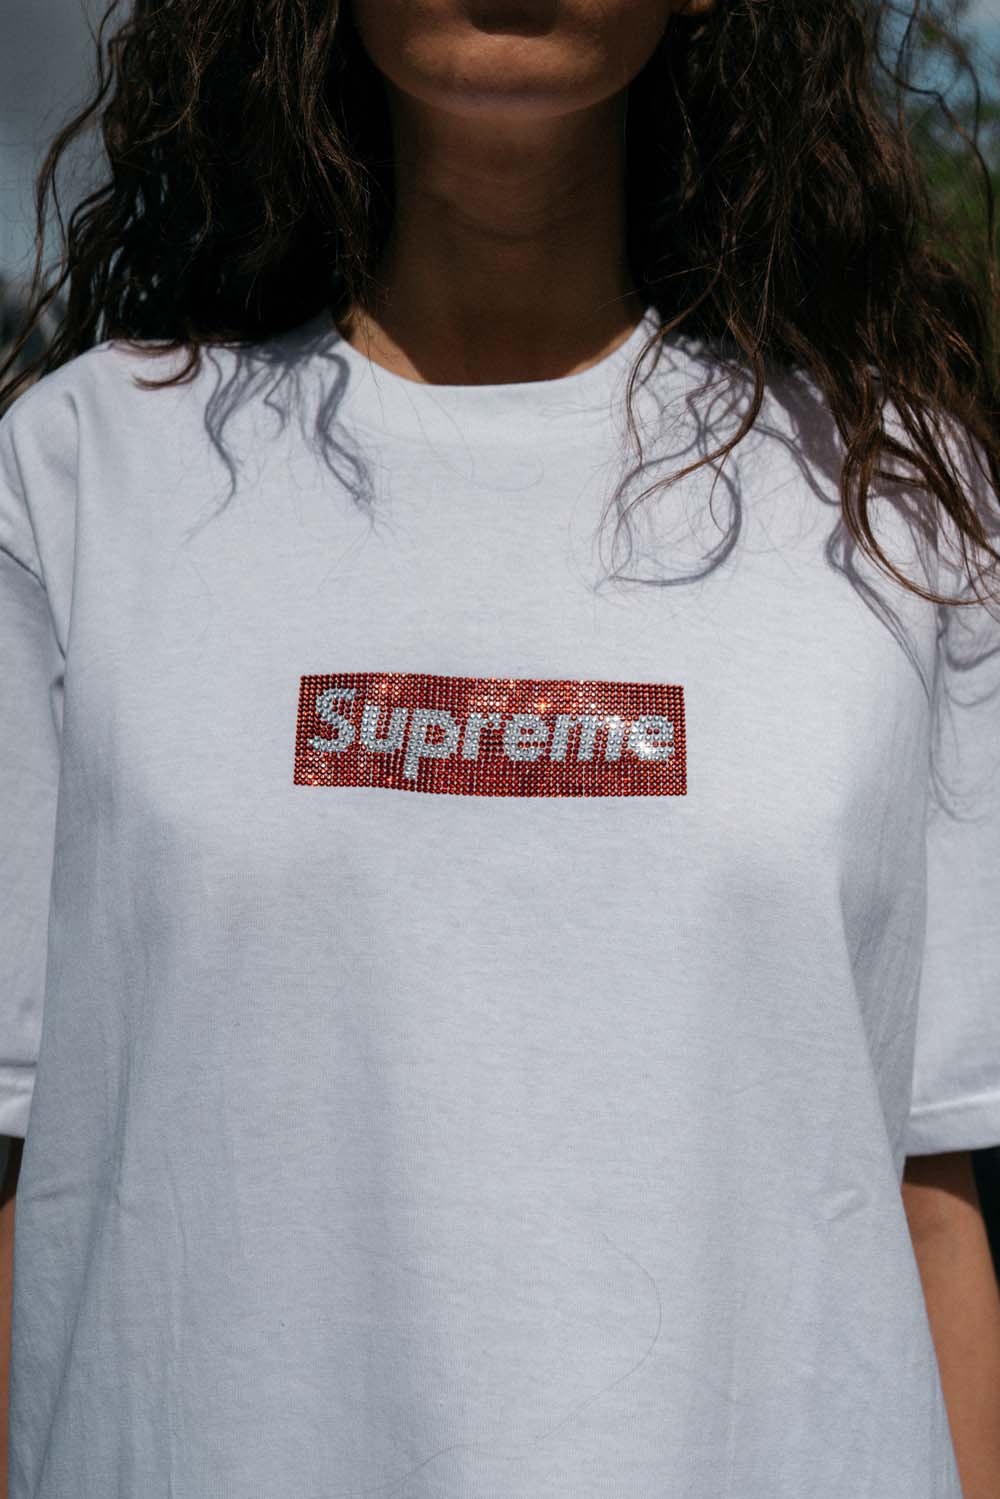 Supreme x Swarovski Box Logo Anniversary Drop collection on body hoodie tee shirt release day april 25 2019 exclusive france paris day model colorway crystal